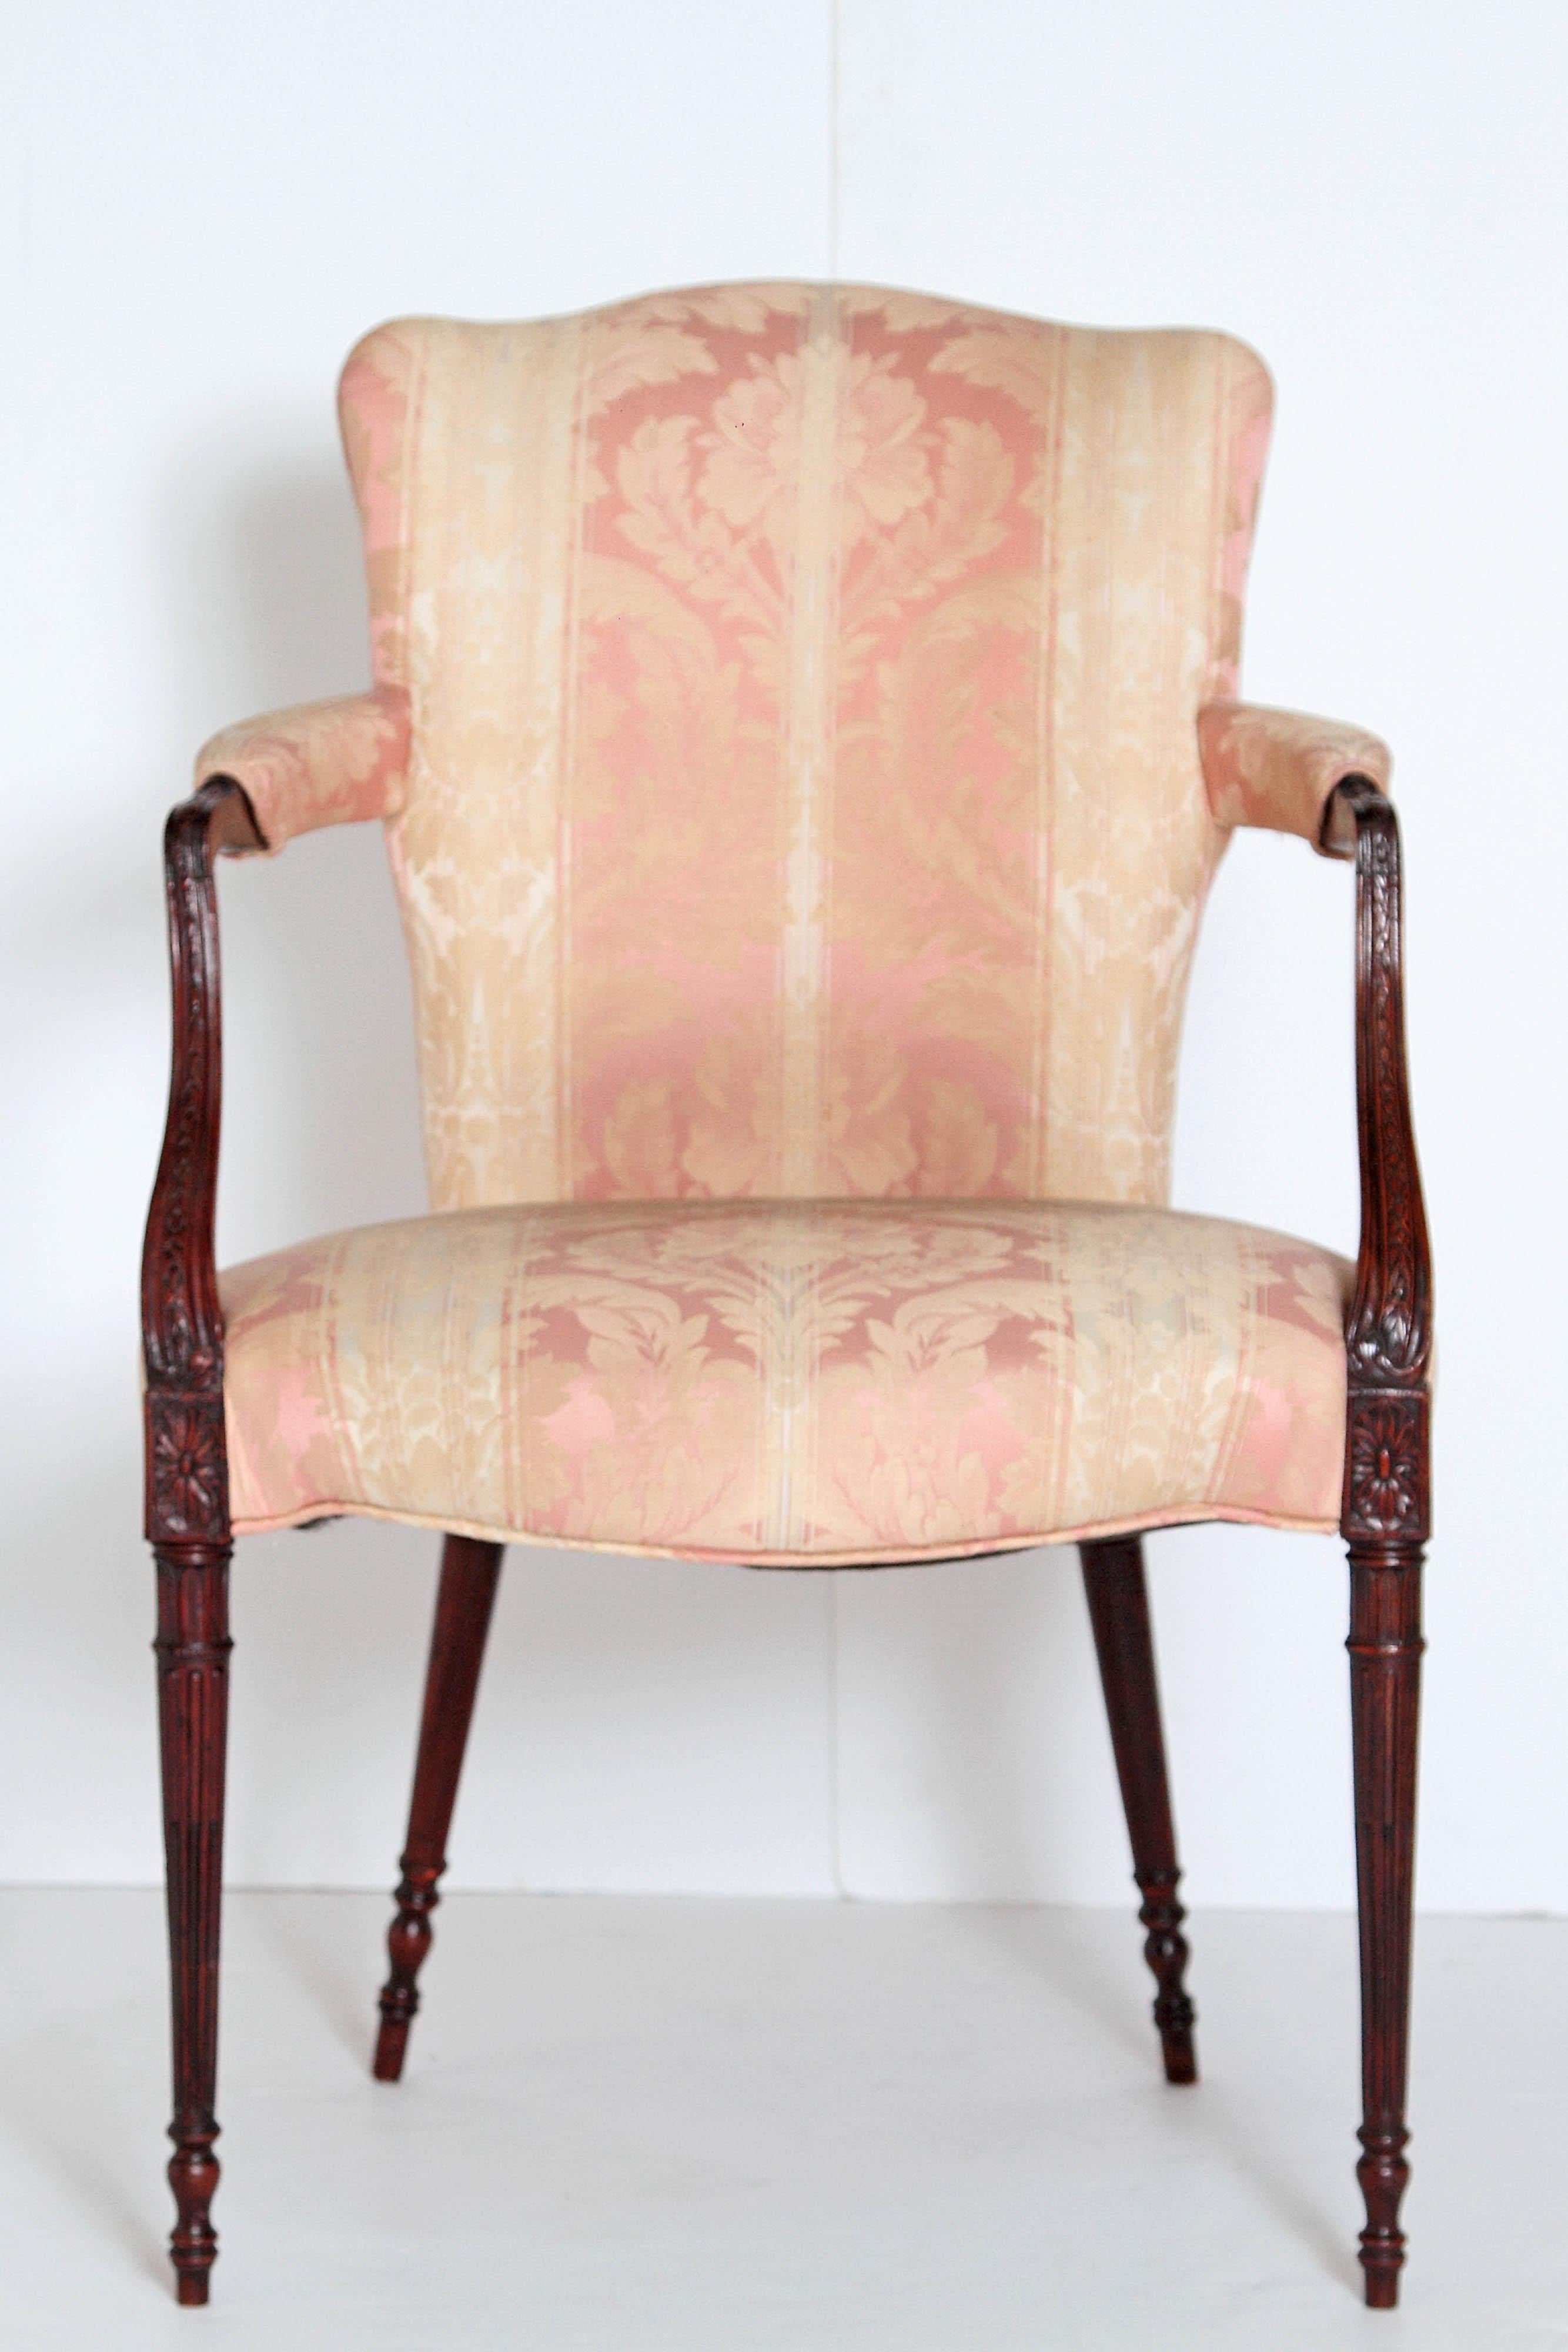 A late 19th century English mahogany open arm chair. Upholstered seat, back and arm rests in cream and pink fabric. Nicely carved arms meet at a rosette block and the reeded tapered legs rest on a cylindrical foot. Late 19th century England.